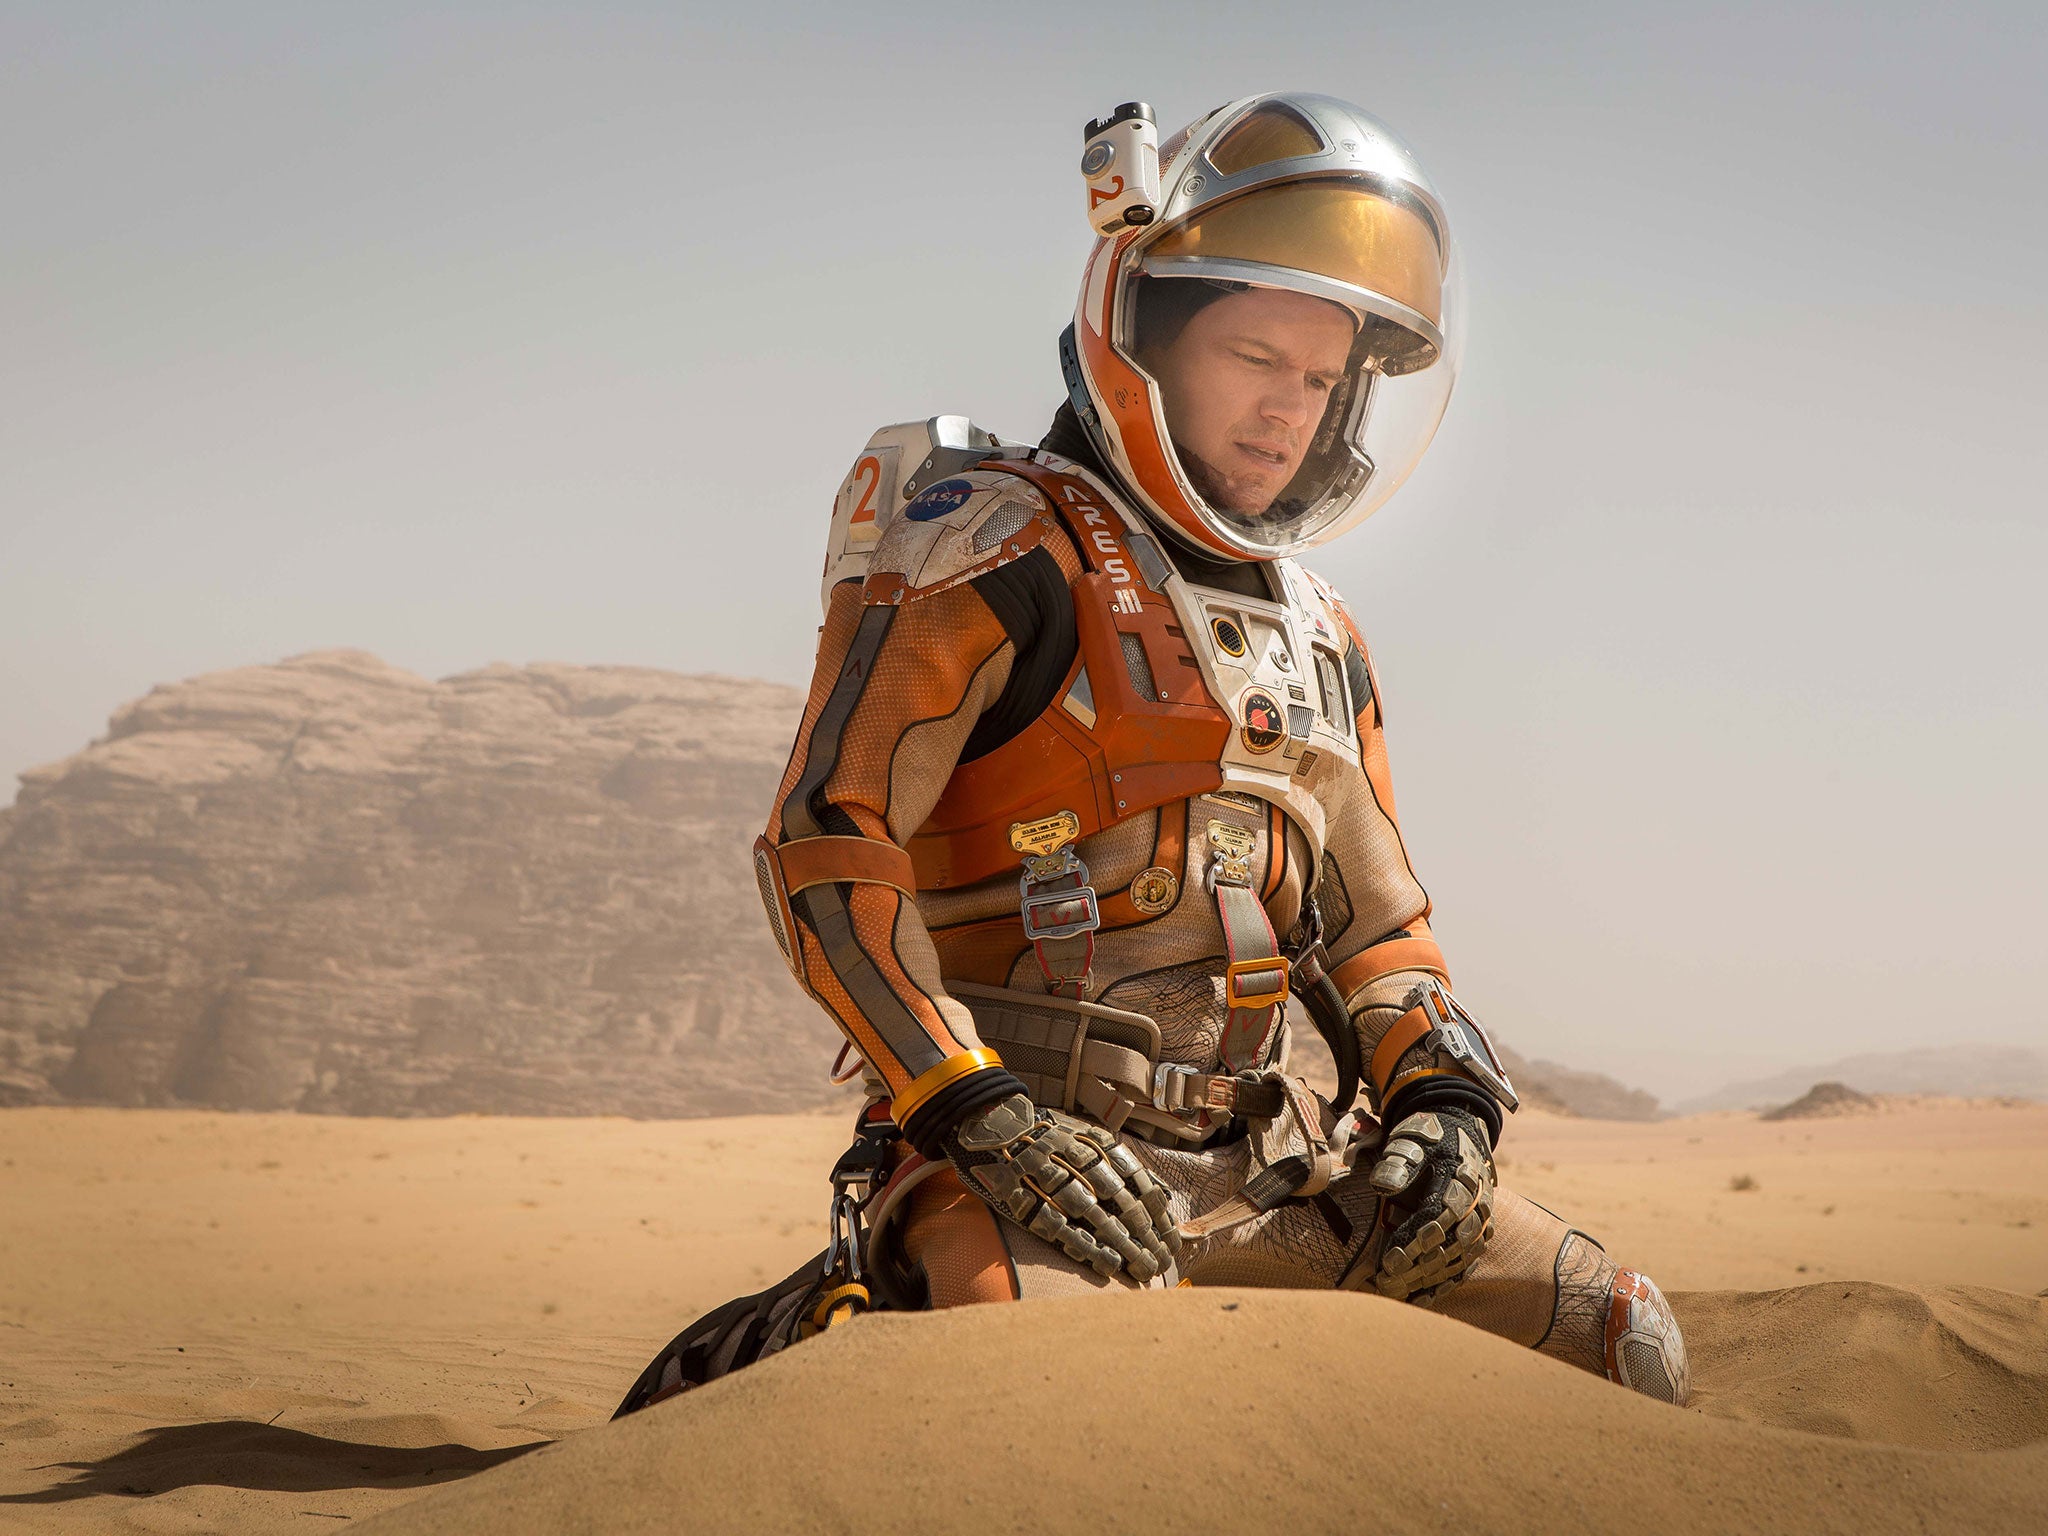 It would have cost $200 billion to bring Matt Damon back from Mars in The Martian